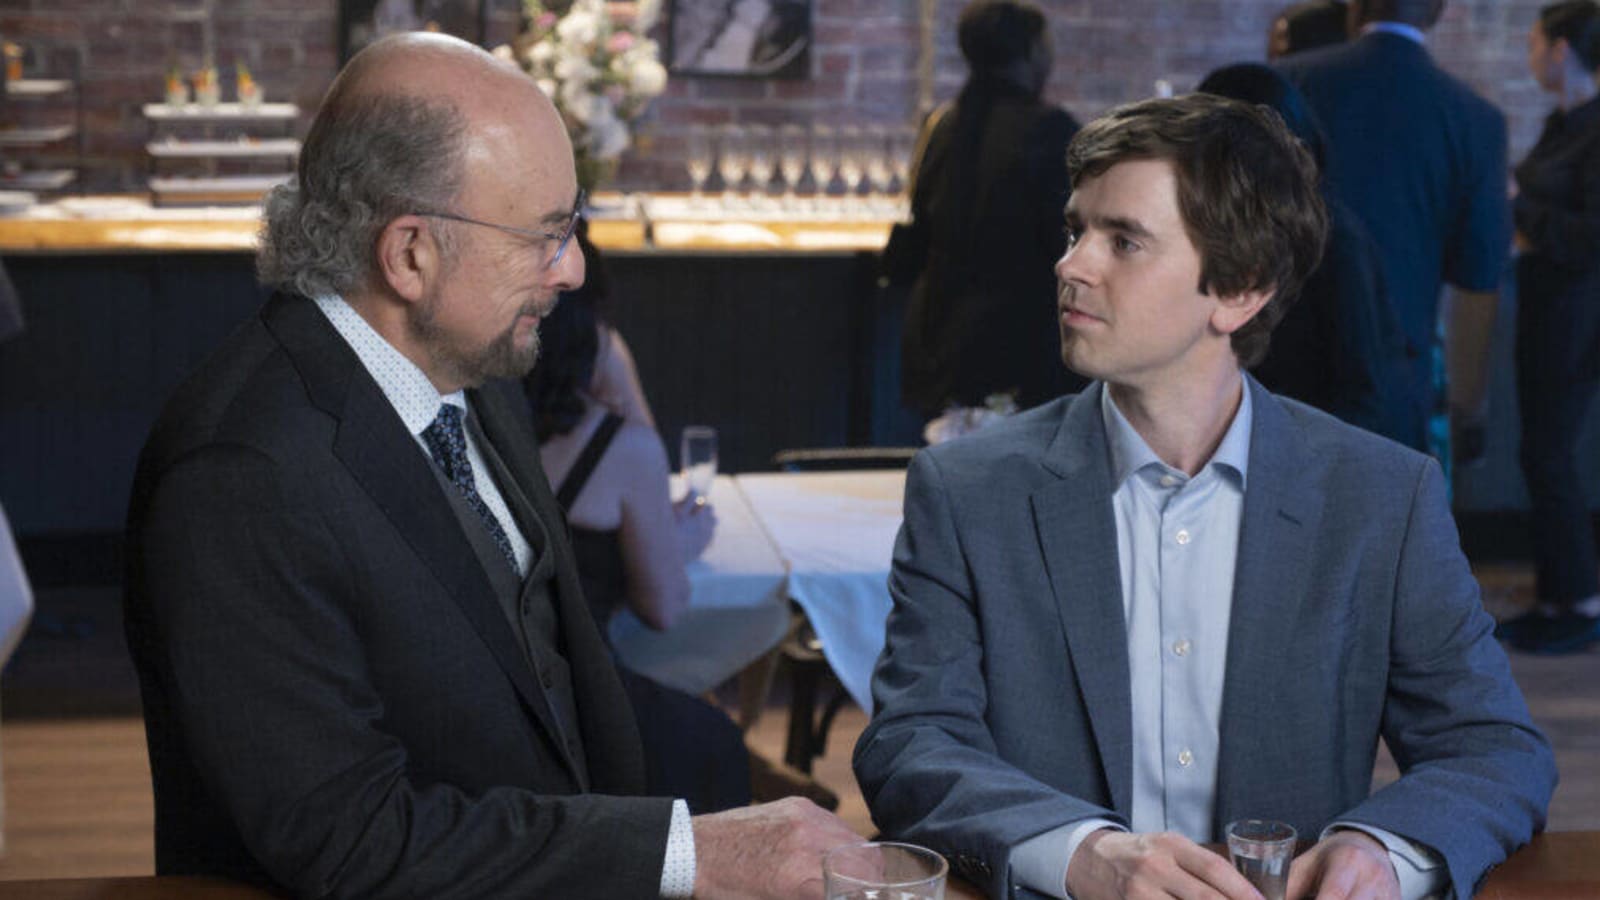 How ‘The Good Doctor’ Double Cliffhanger Sets up Series Finale, According to Showrunners